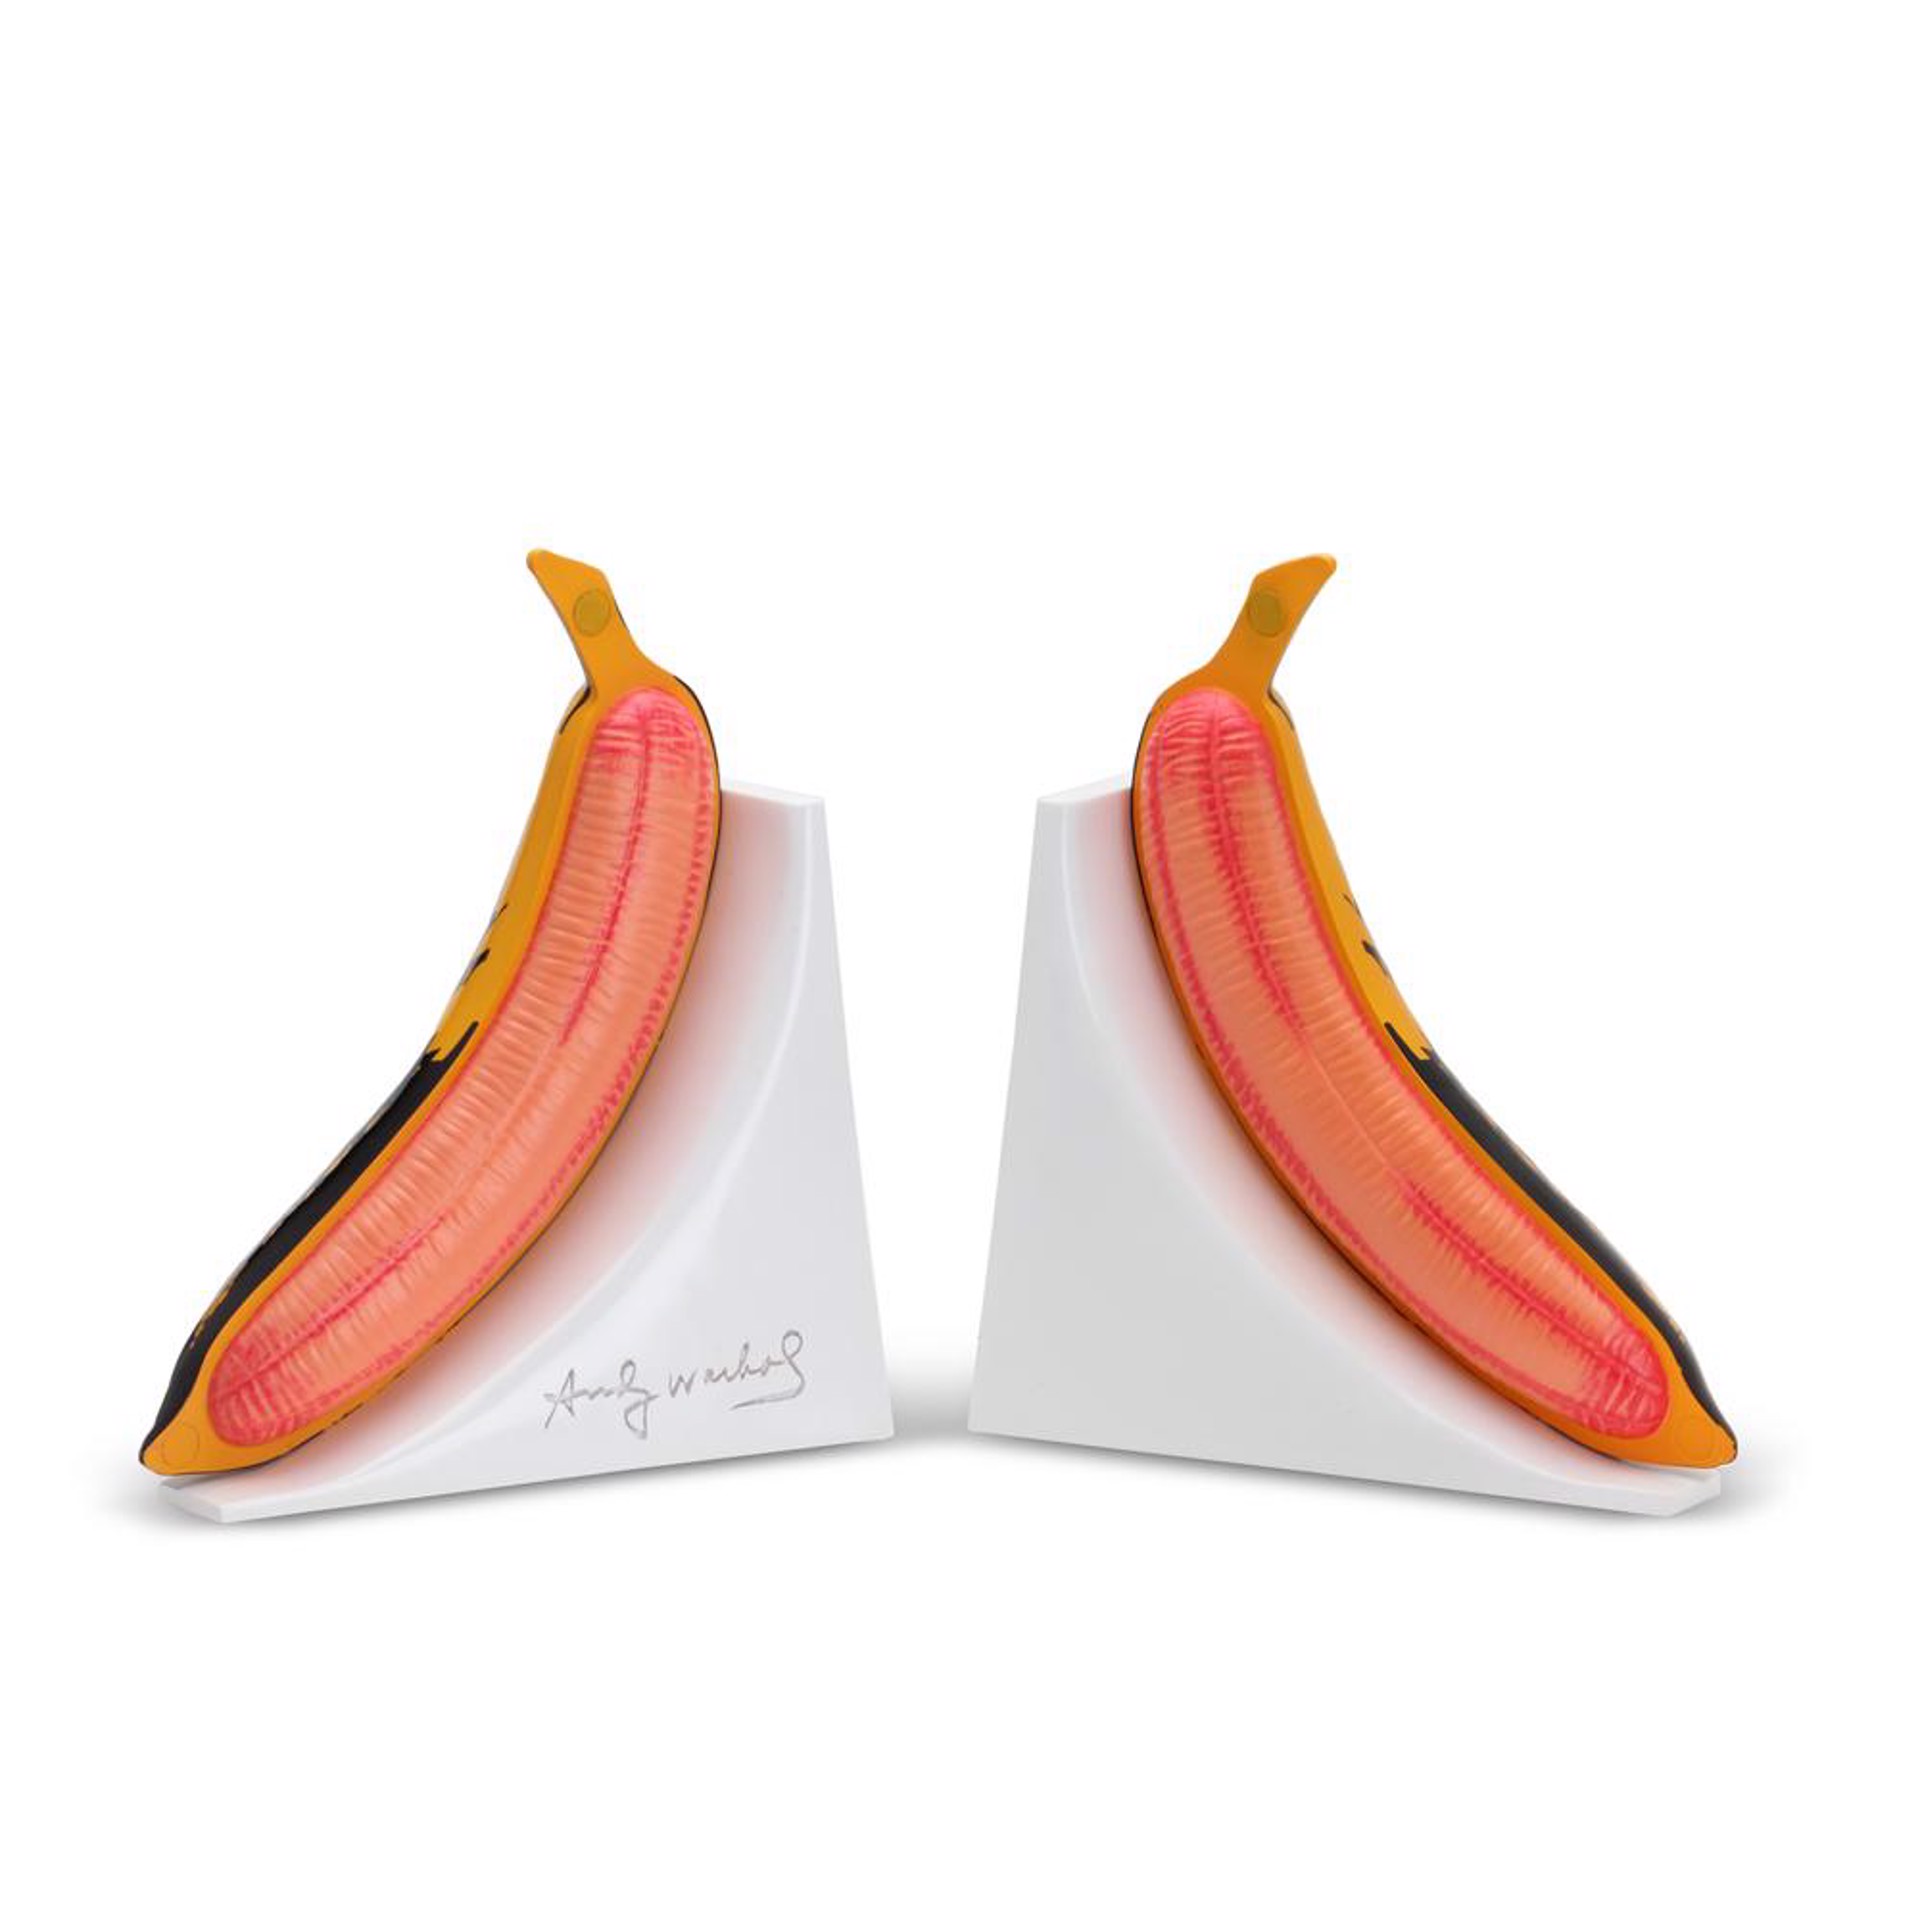 Andy Warhol Resin Banana Bookends by Andy Warhol